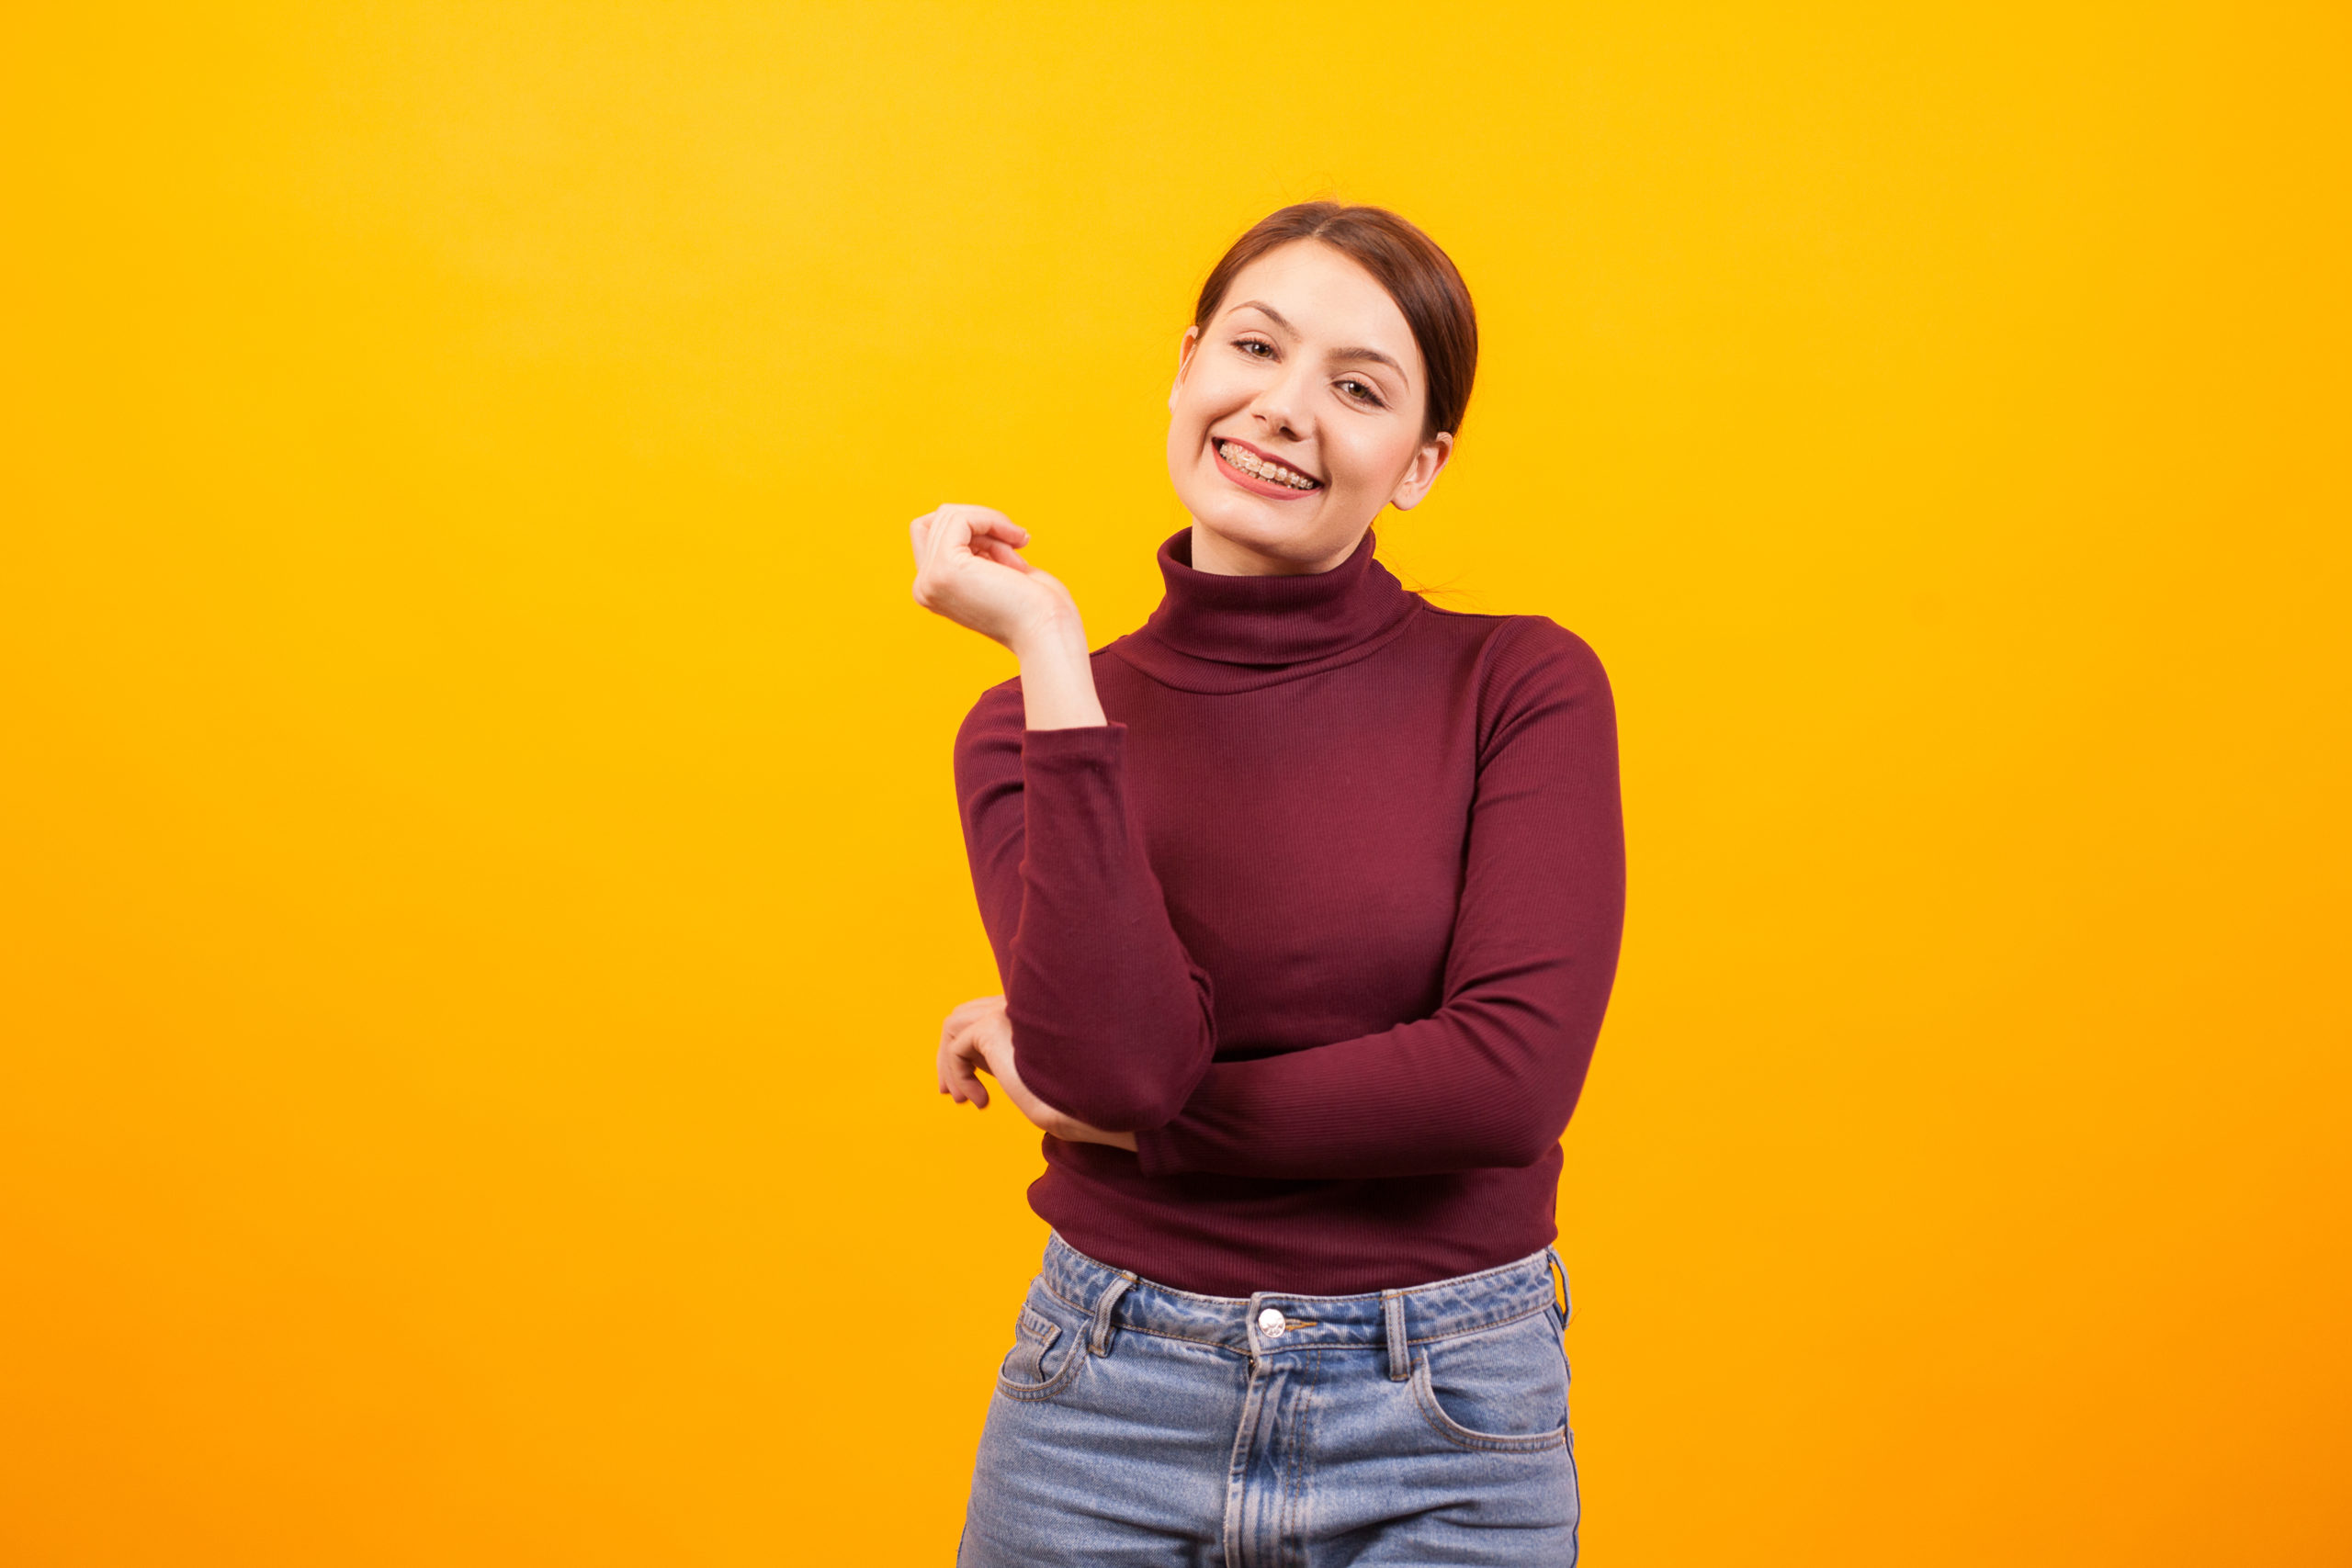 Young woman wearing a red turtleneck and jeans smiling, showing off her braces and standing in front of a yellow background